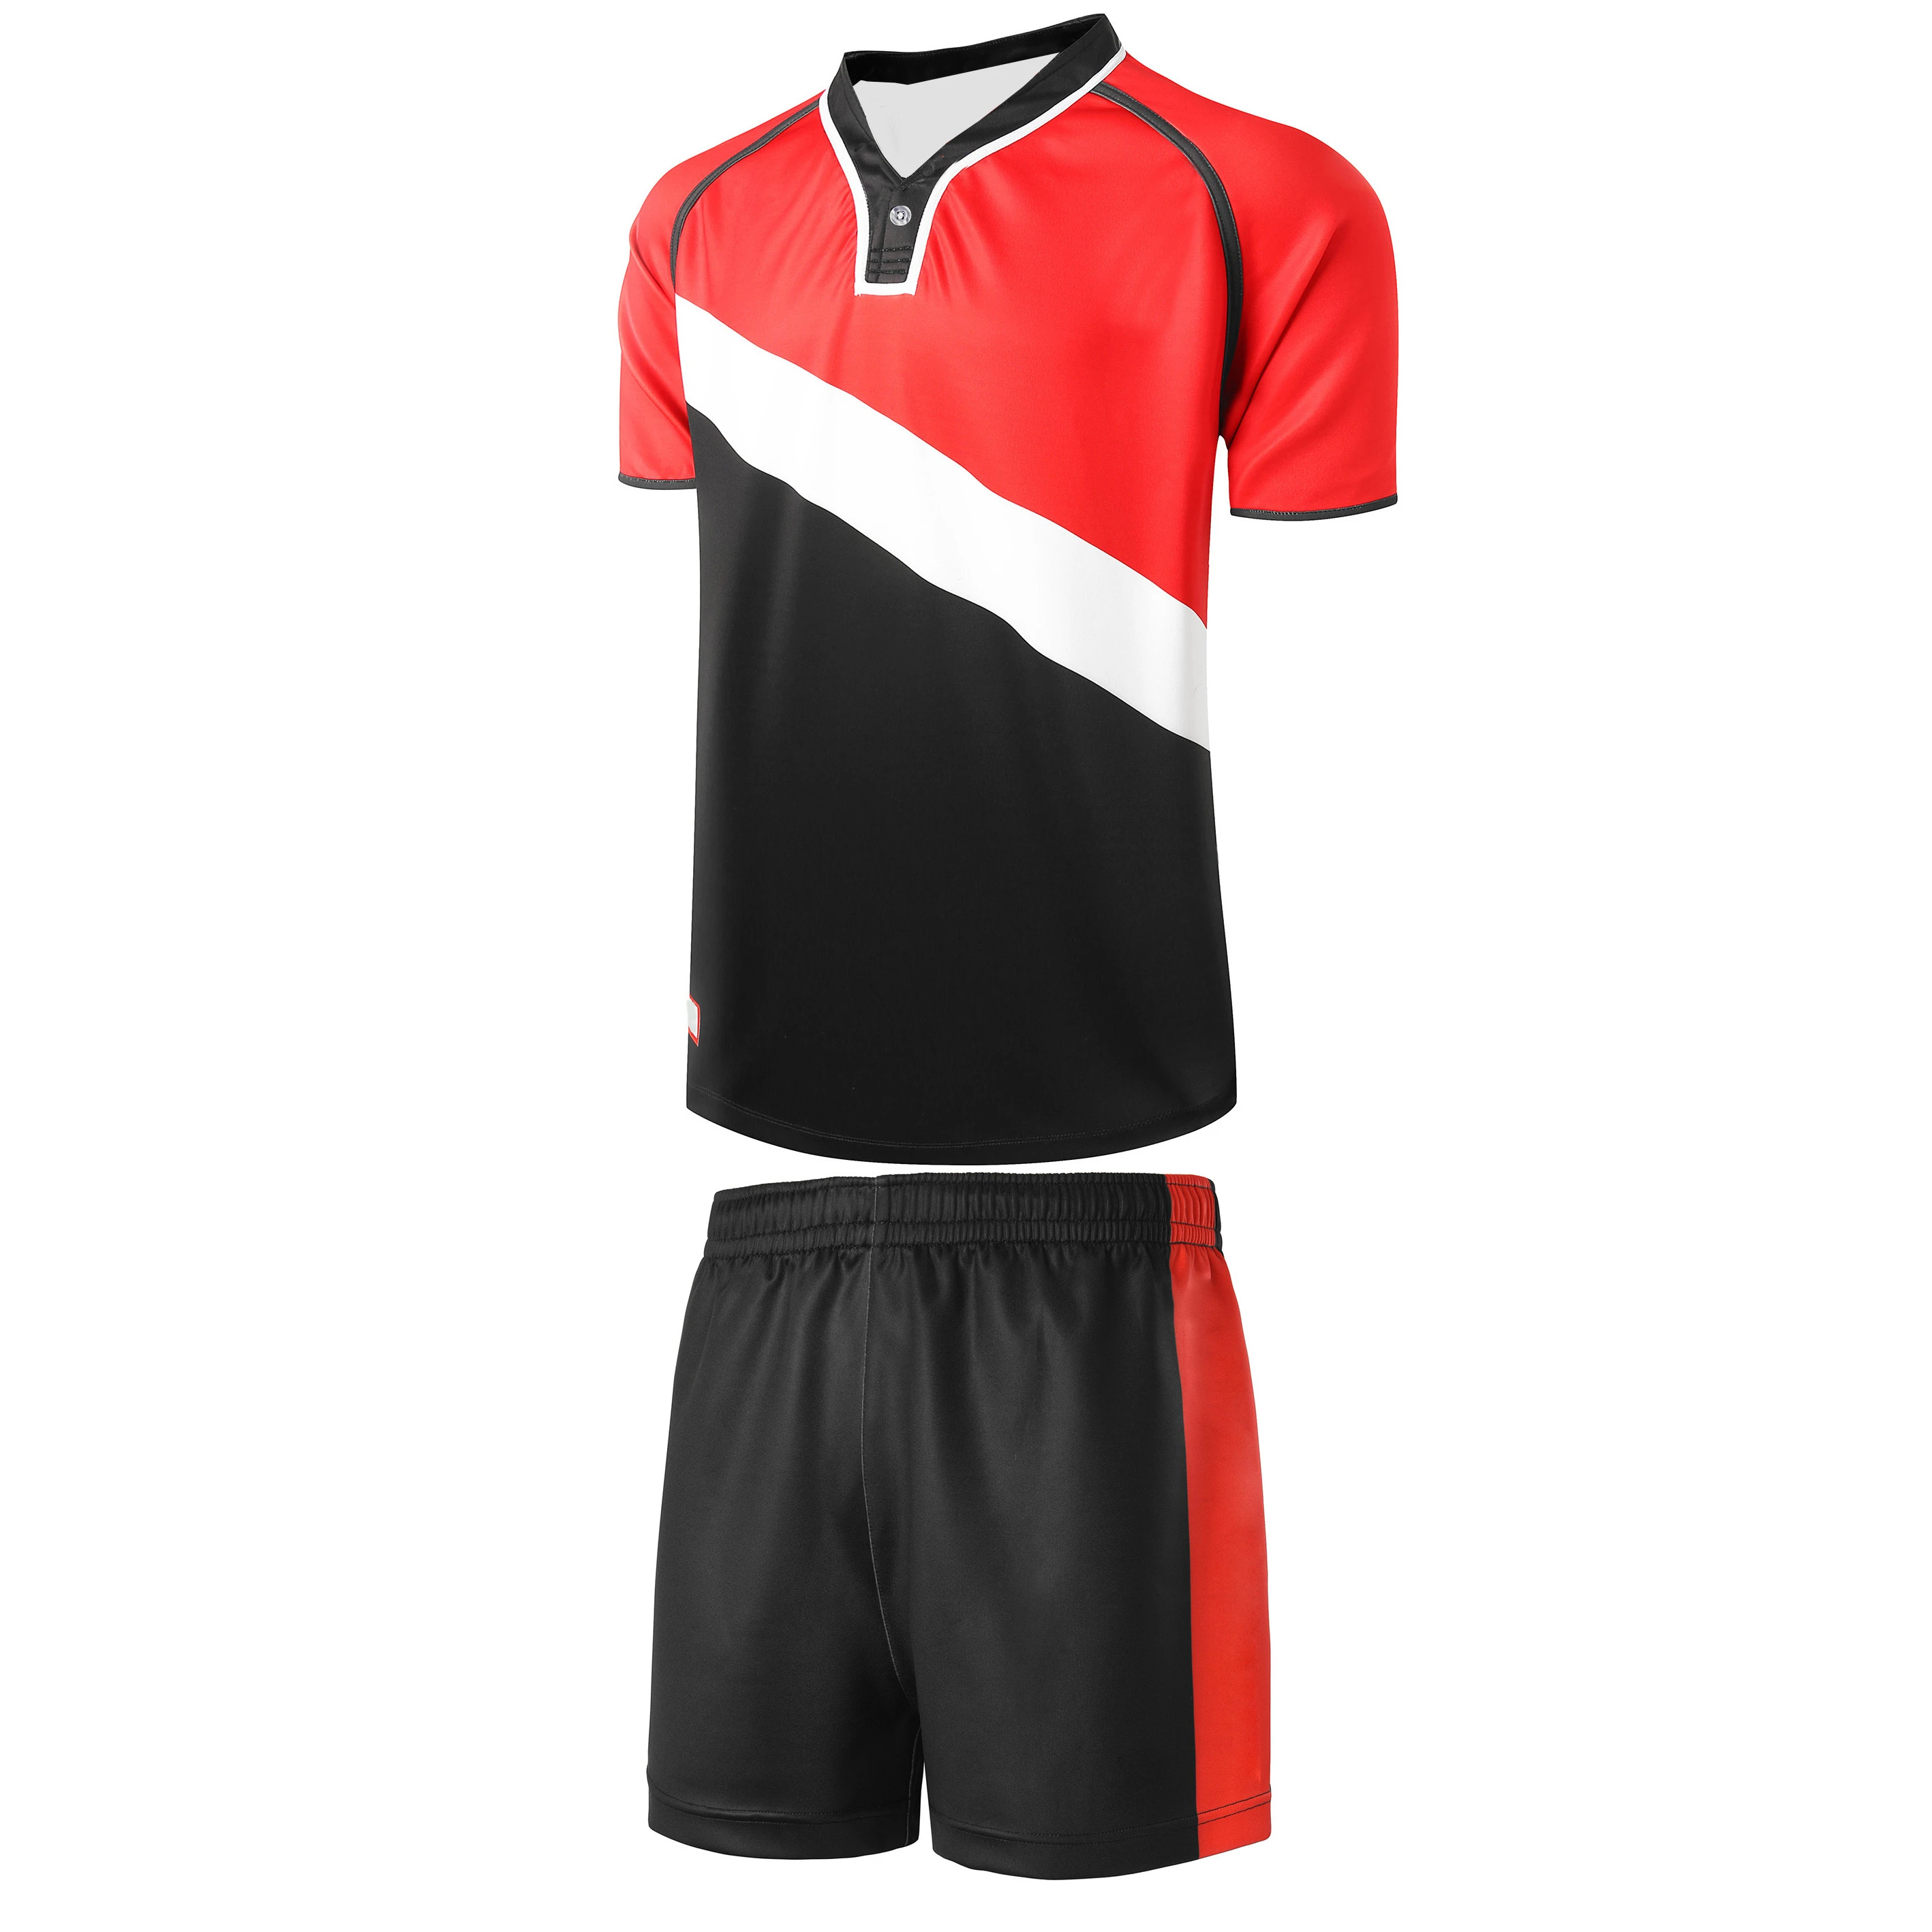 Top quality Sublimated best selling rugby uniform